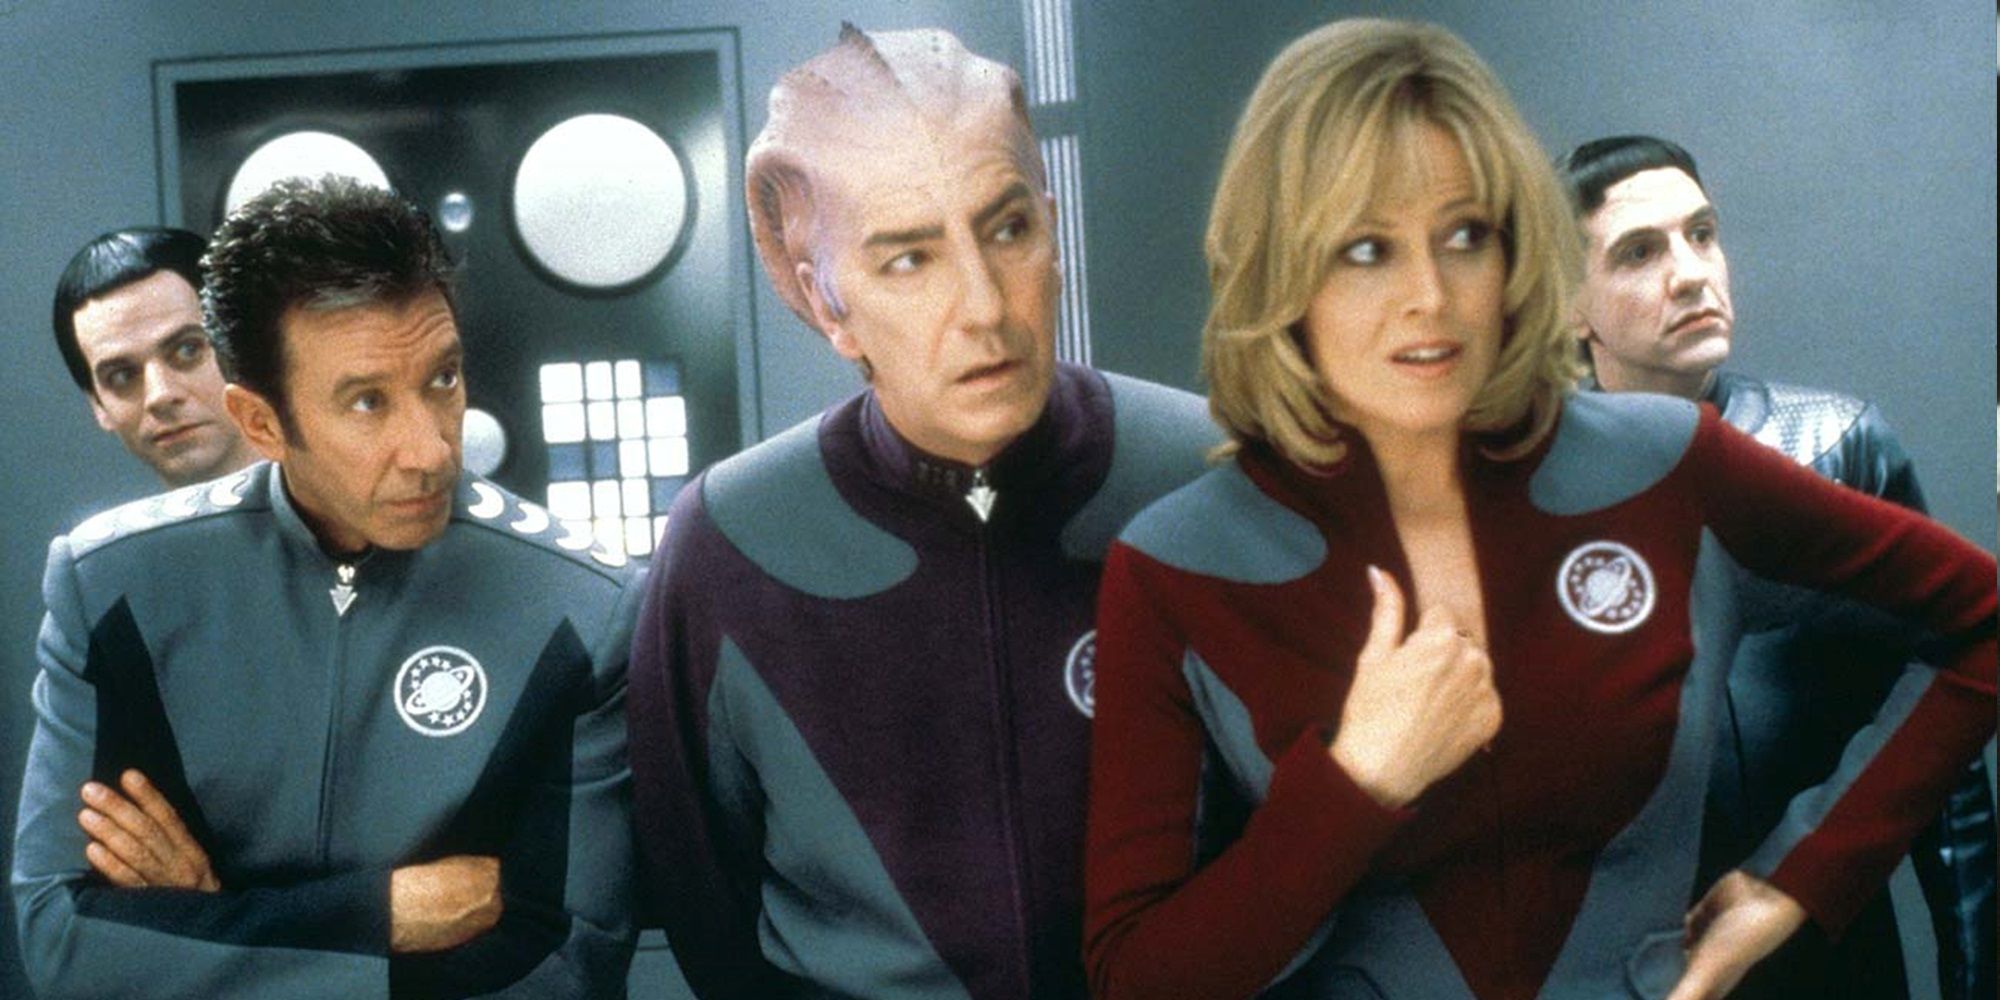 The cast of Galaxy Quest looking surprised